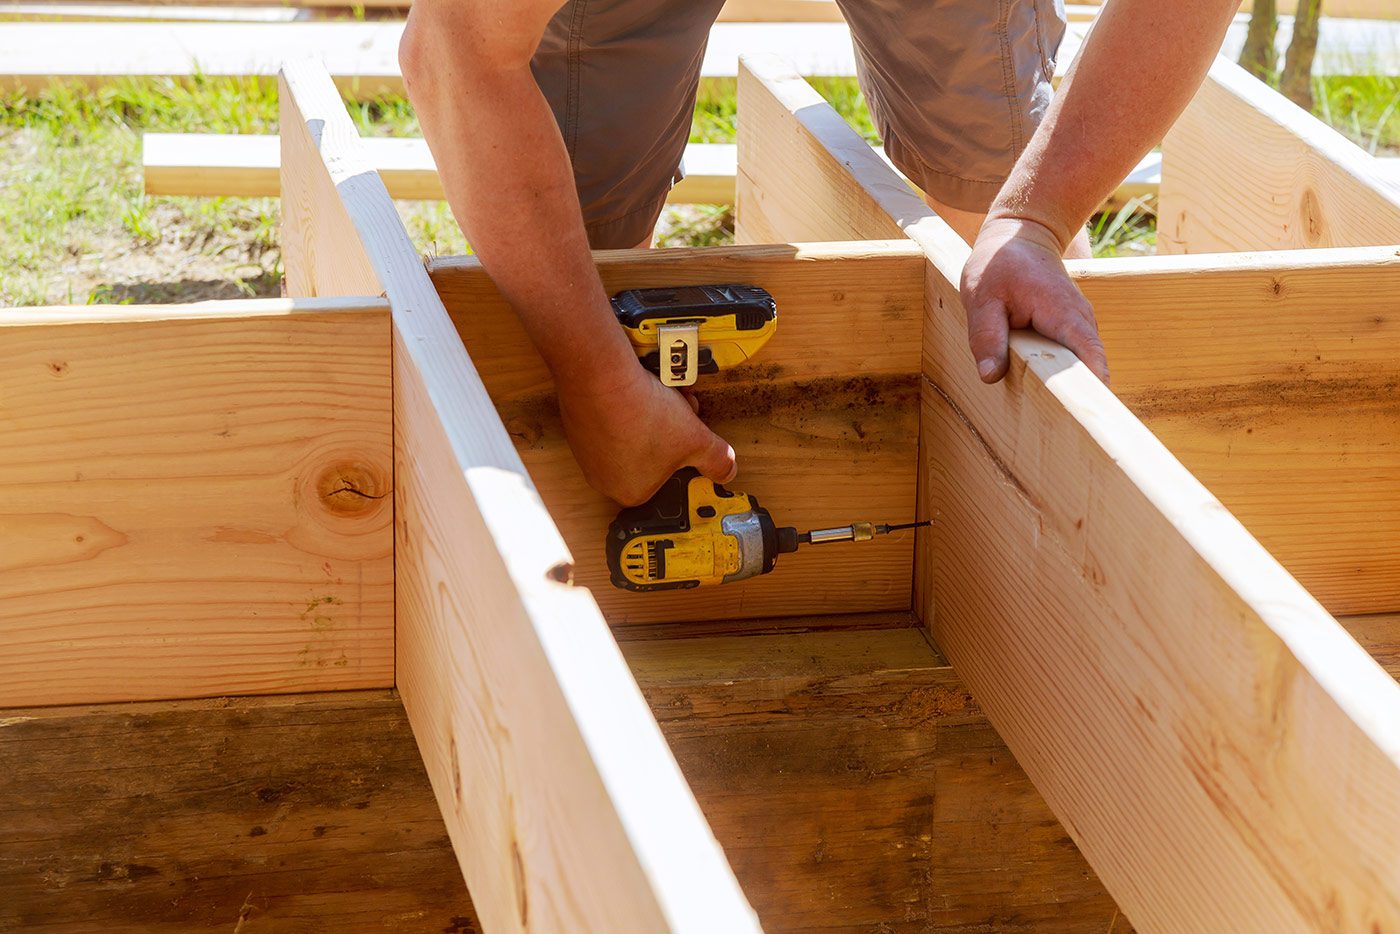 A person is using a pair of hand tools to build a wooden structure.